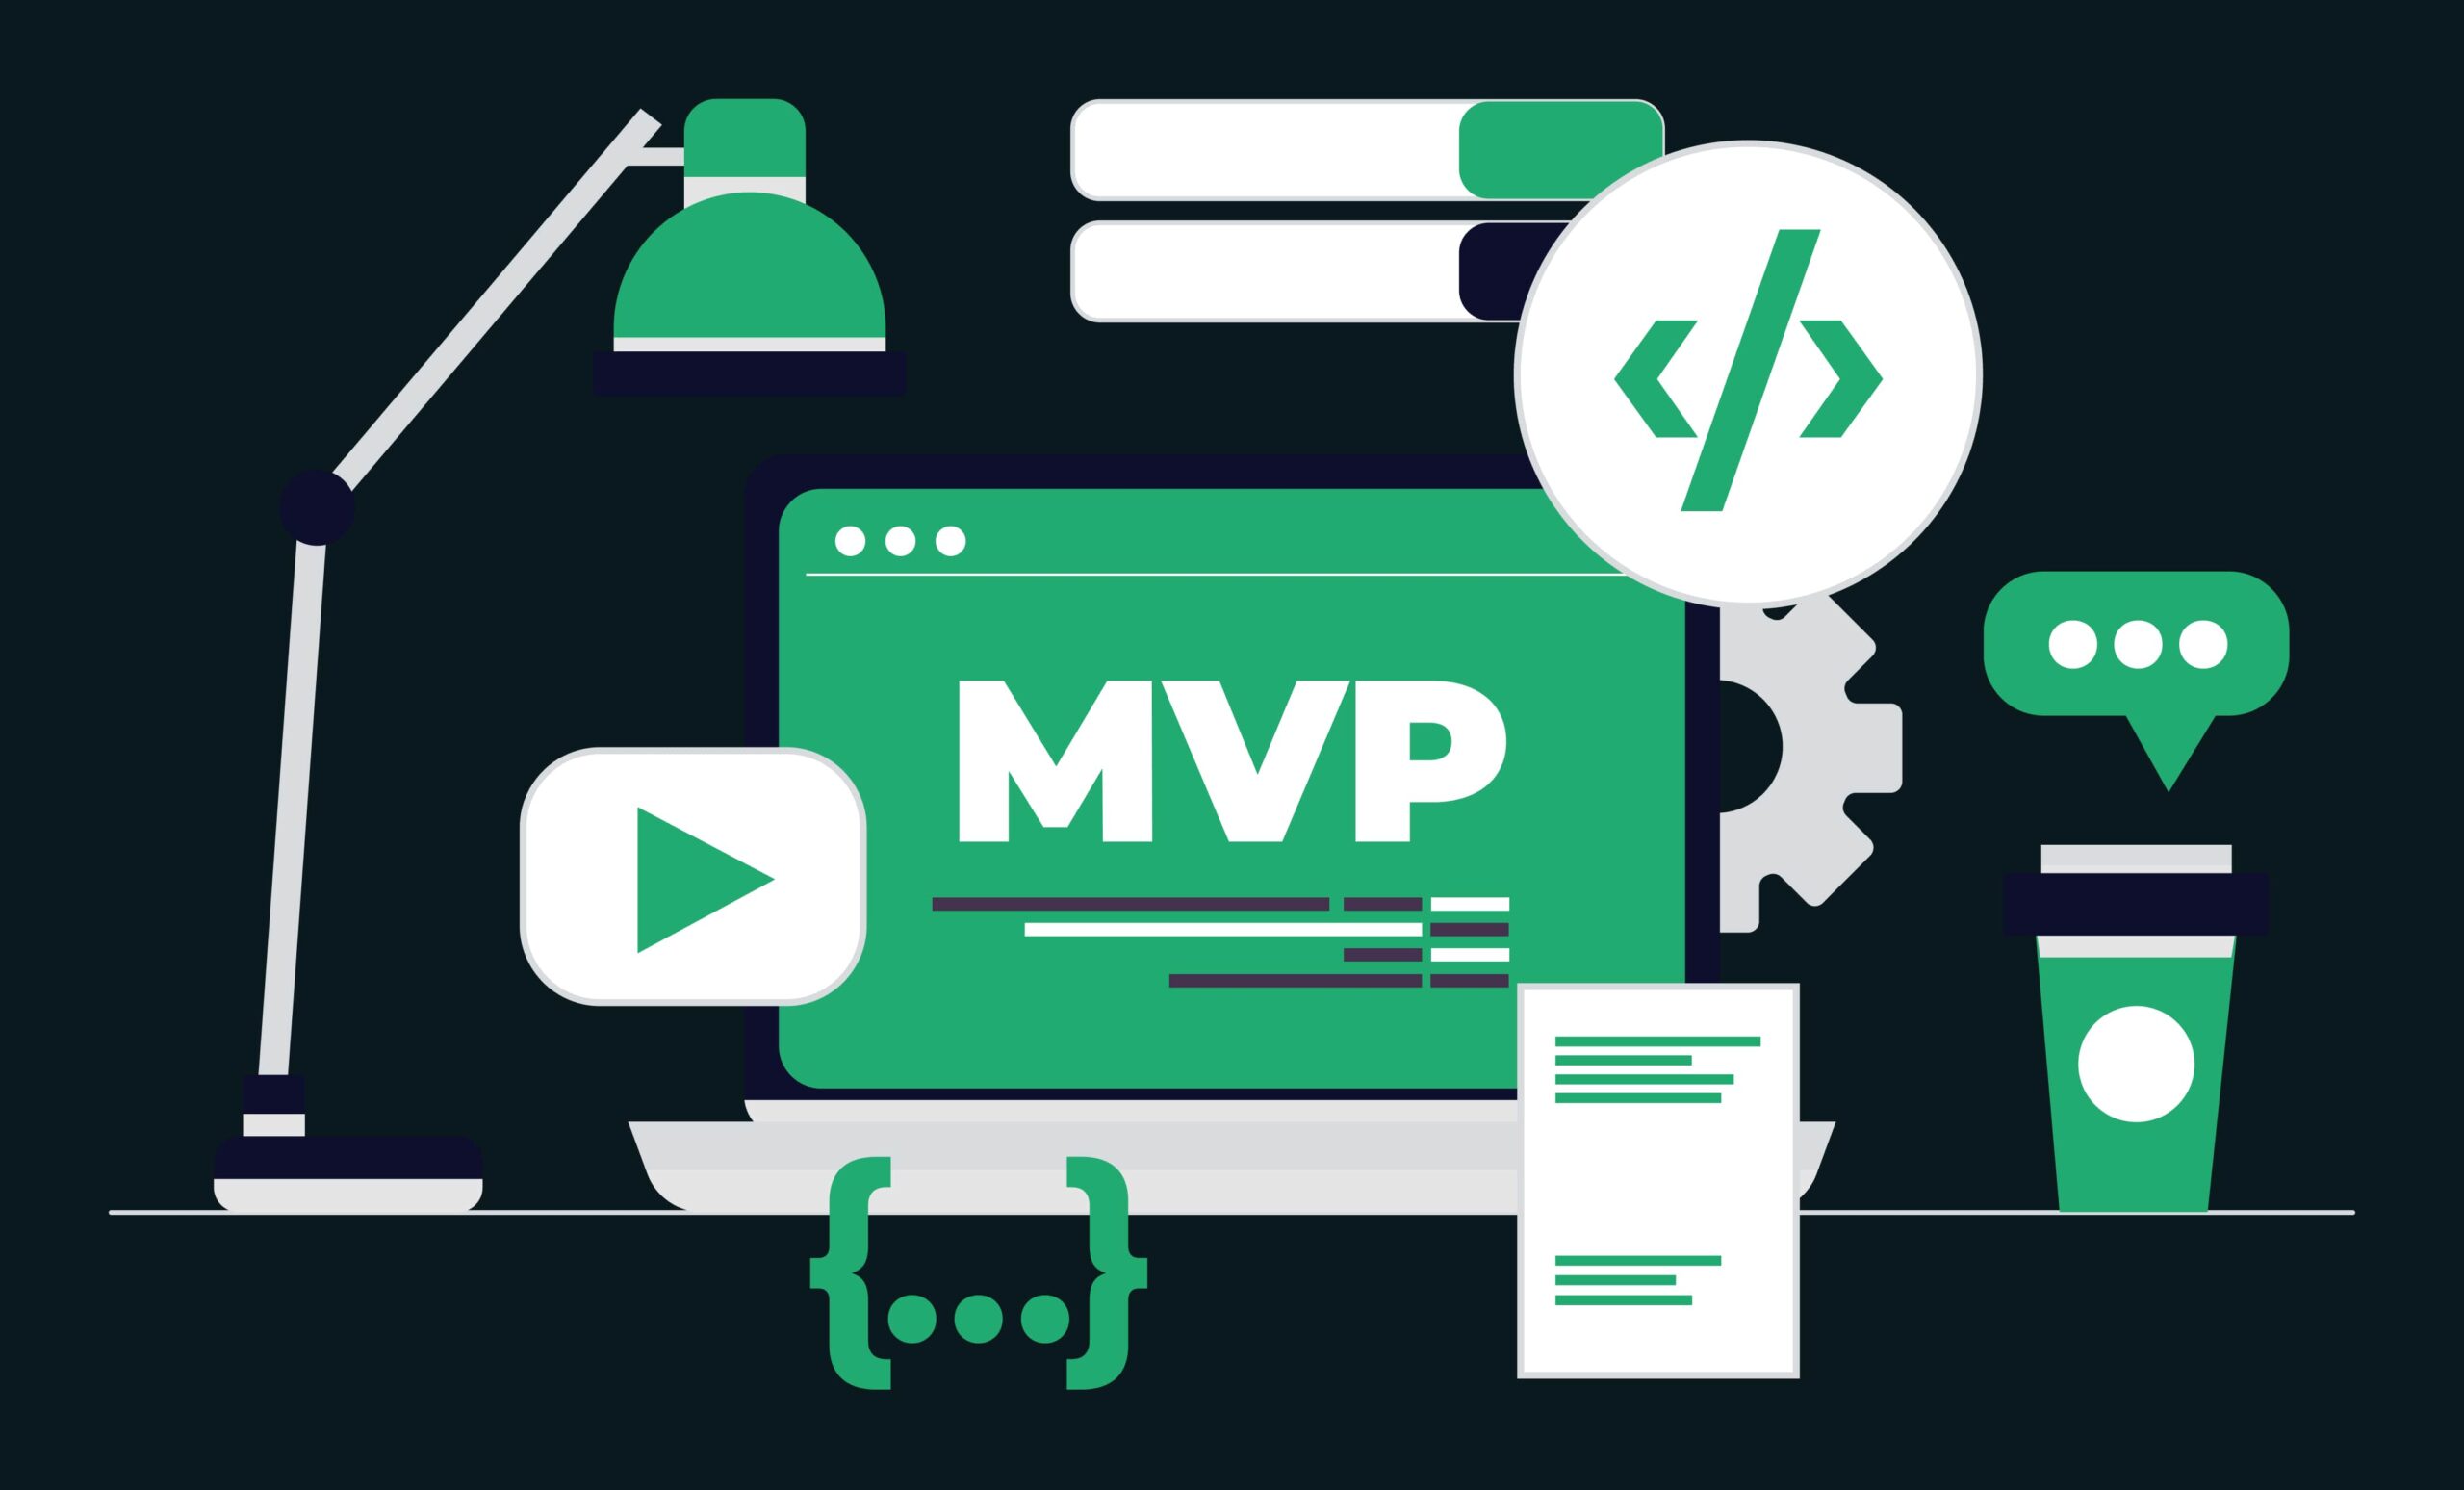 WHY IS MVP IMPORTANT FOR SOFTWARE DEVELOPMENT